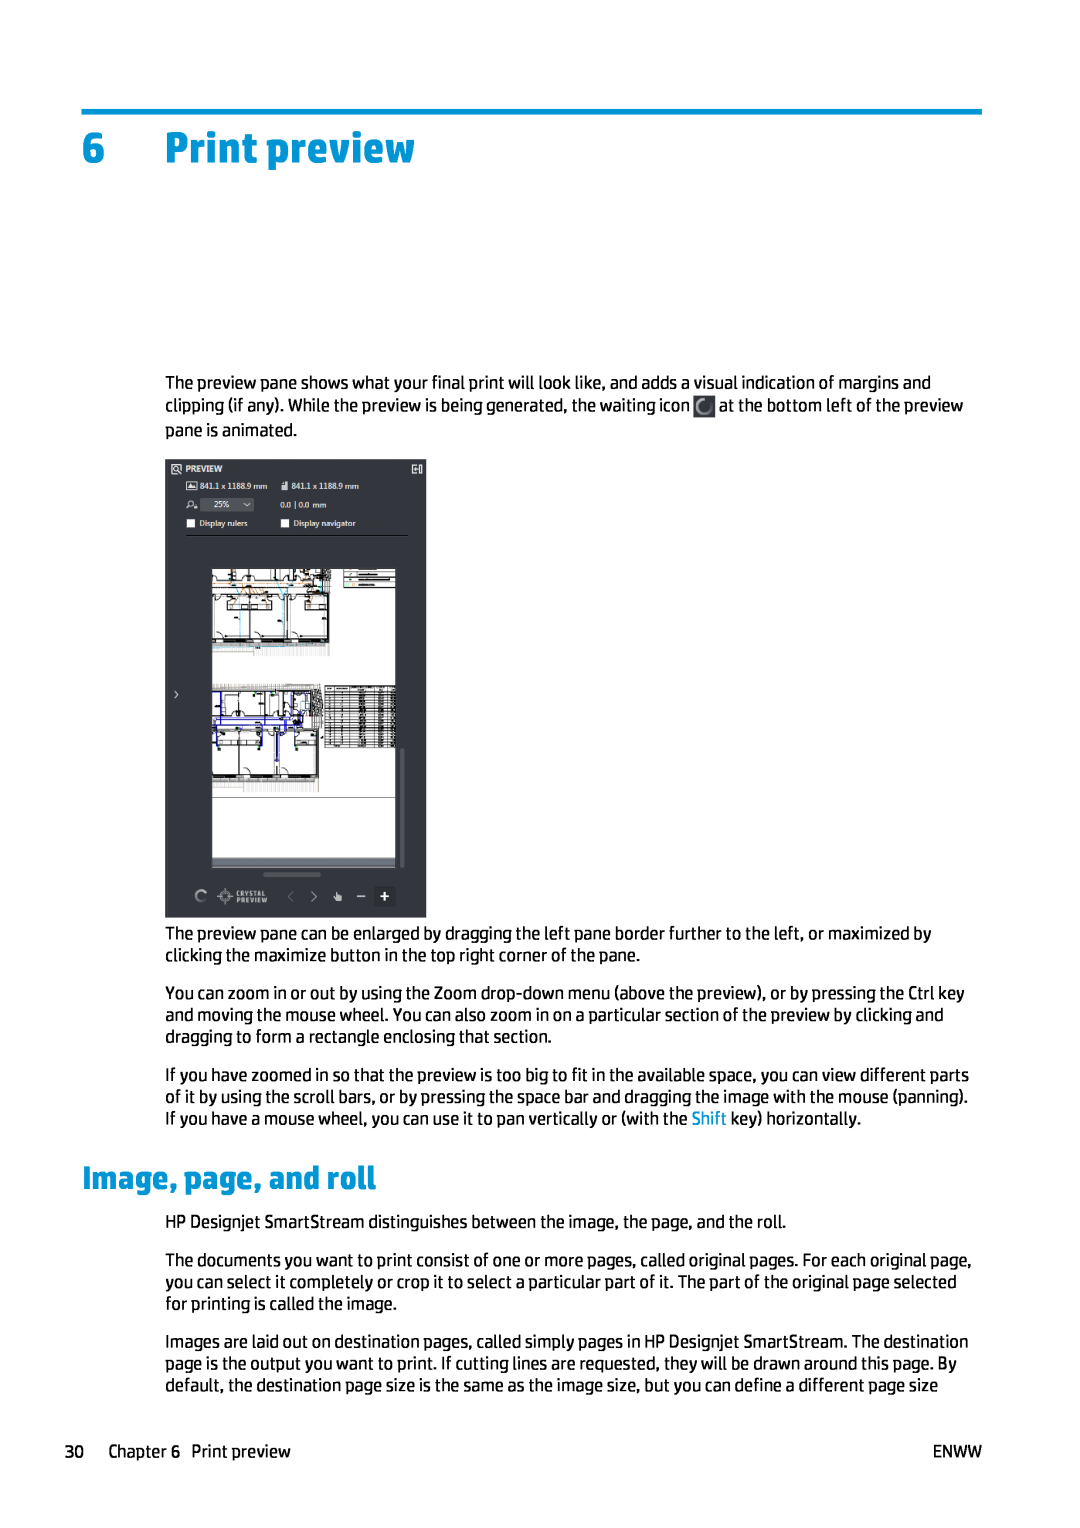 HP SmartStream Software for s manual Print preview, Image, page, and roll 